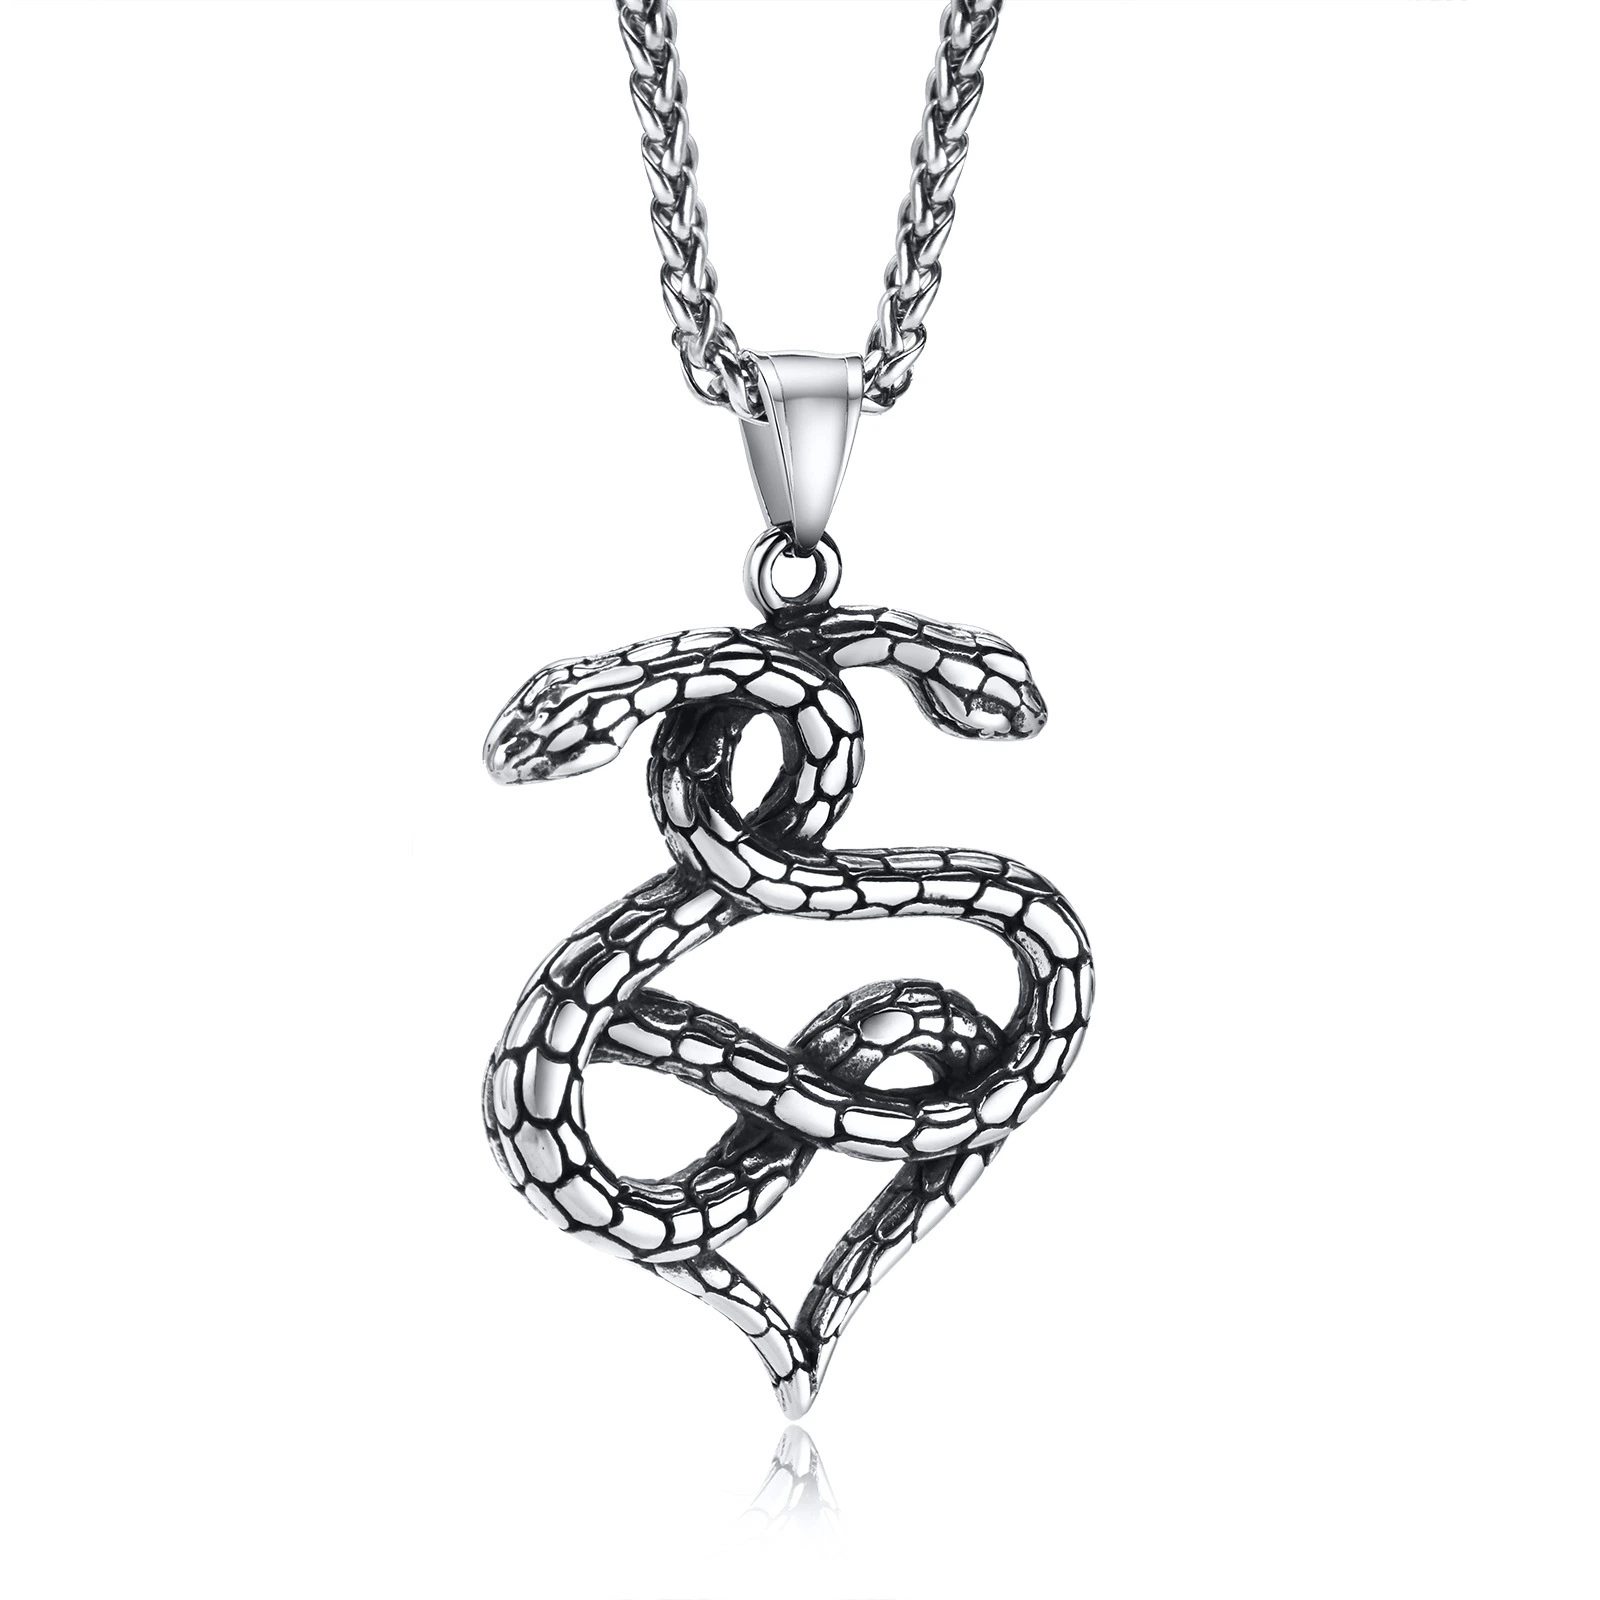 Fashion Foreign Trade Titanium Steel Jewelry Stainless Steel Double Snake Wrapped Pendant Steel Men's Necklace Fashion Accessories